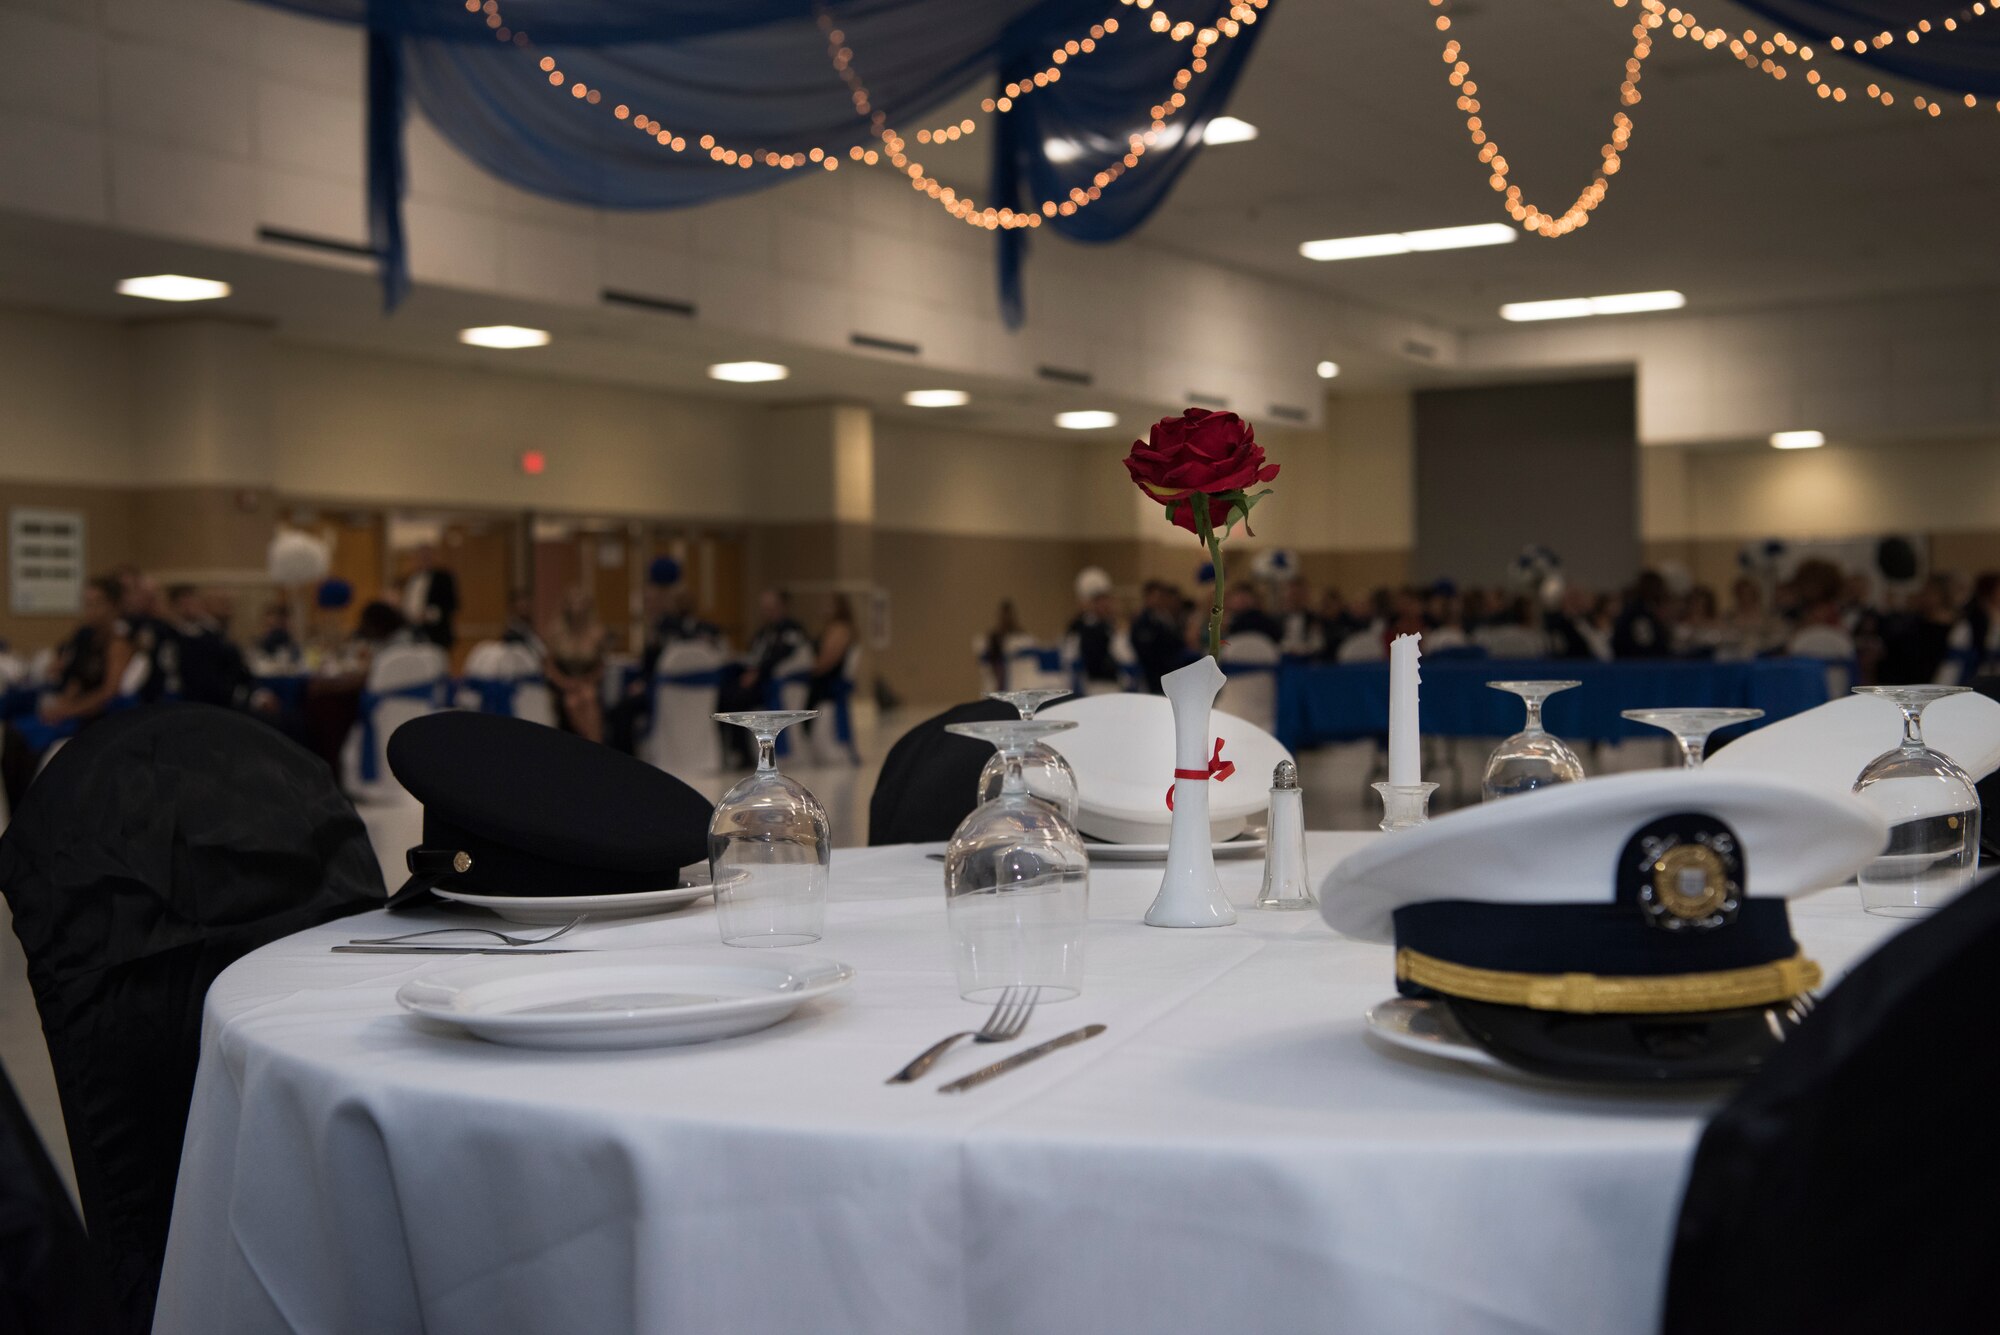 Before festivities began, Airmen assigned to the 47th Flying Training Wing set a table dedicated to America’s POW/MIA at Laughlin’s Air Force Ball in Del Rio, Texas, Sept. 13, 2019. At nearly every wing level celebration, time is carved out to remember those who couldn’t be in attendance, and an empty table is ceremoniously set in their honor. (U.S. Air Force photo by Staff Sgt. Benjamin N. Valmoja)